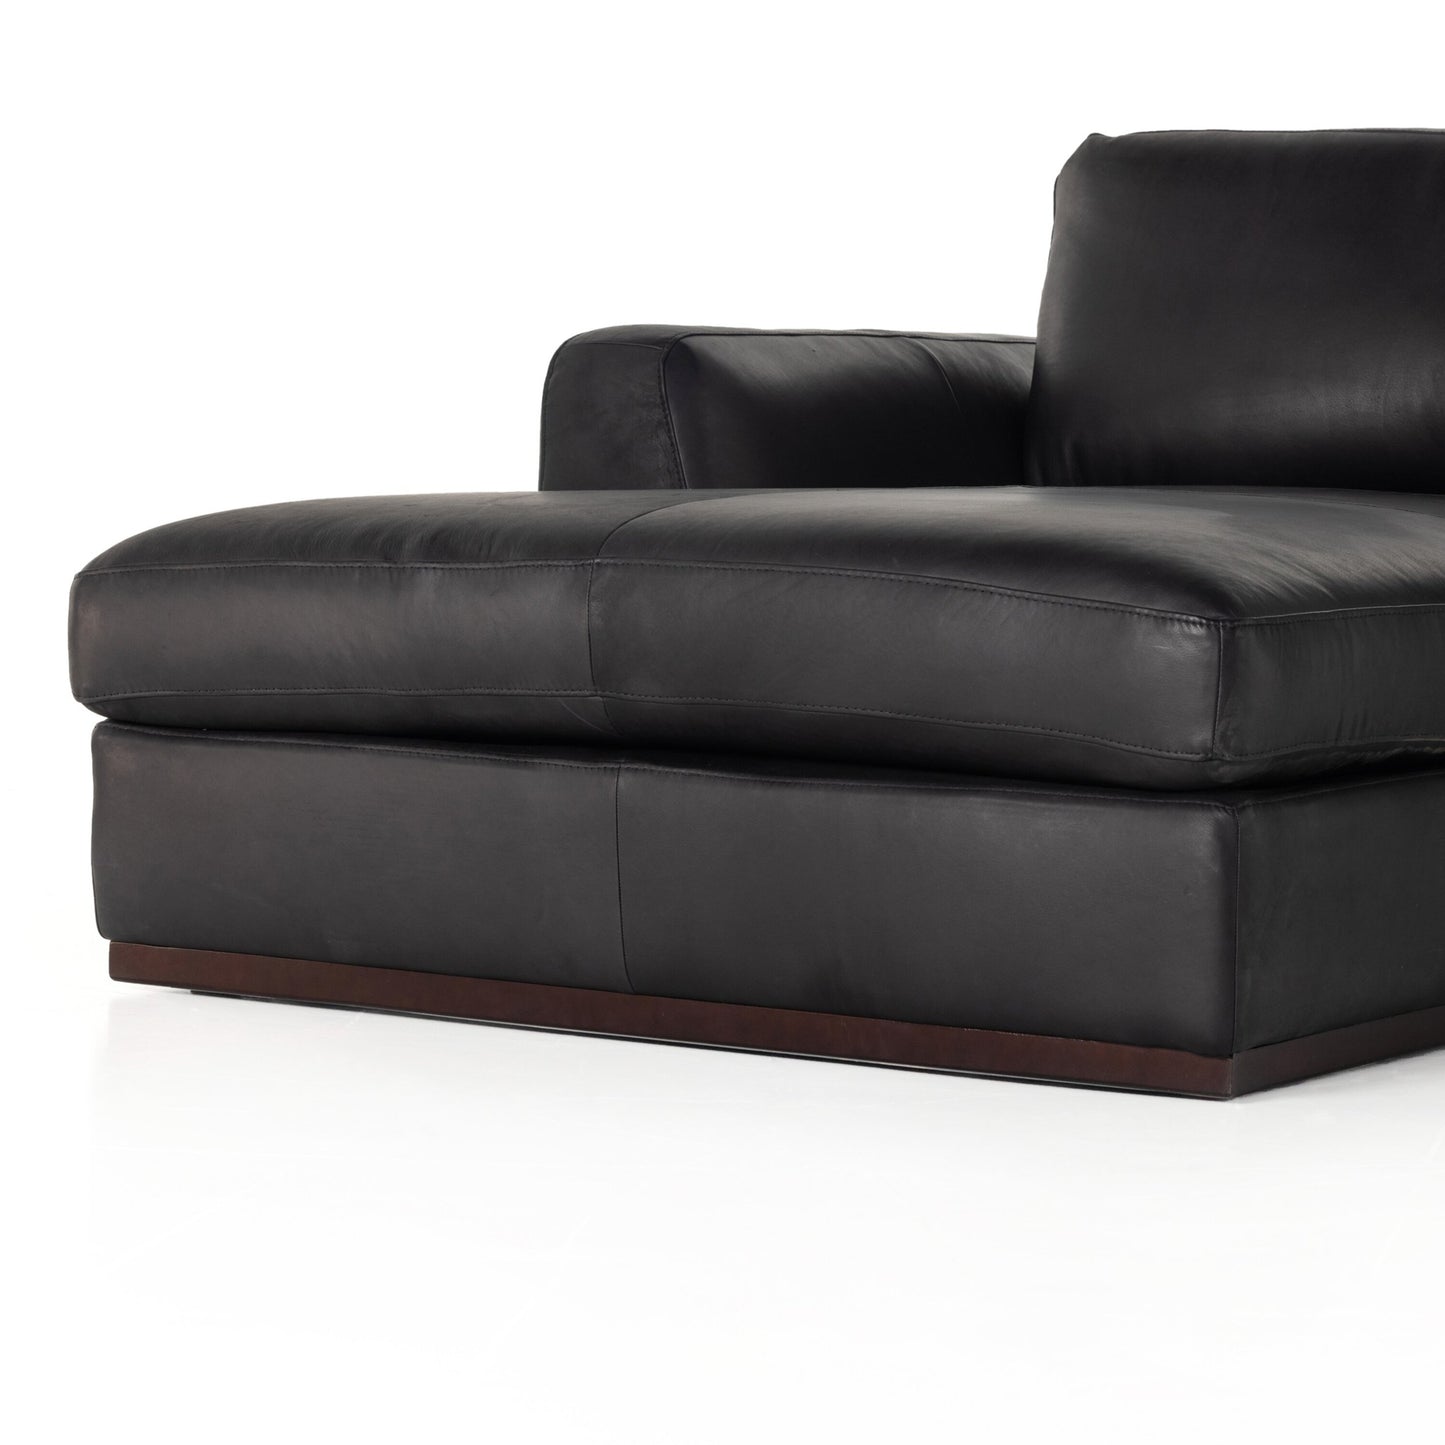 Colt laf chaise pc-heirloom black